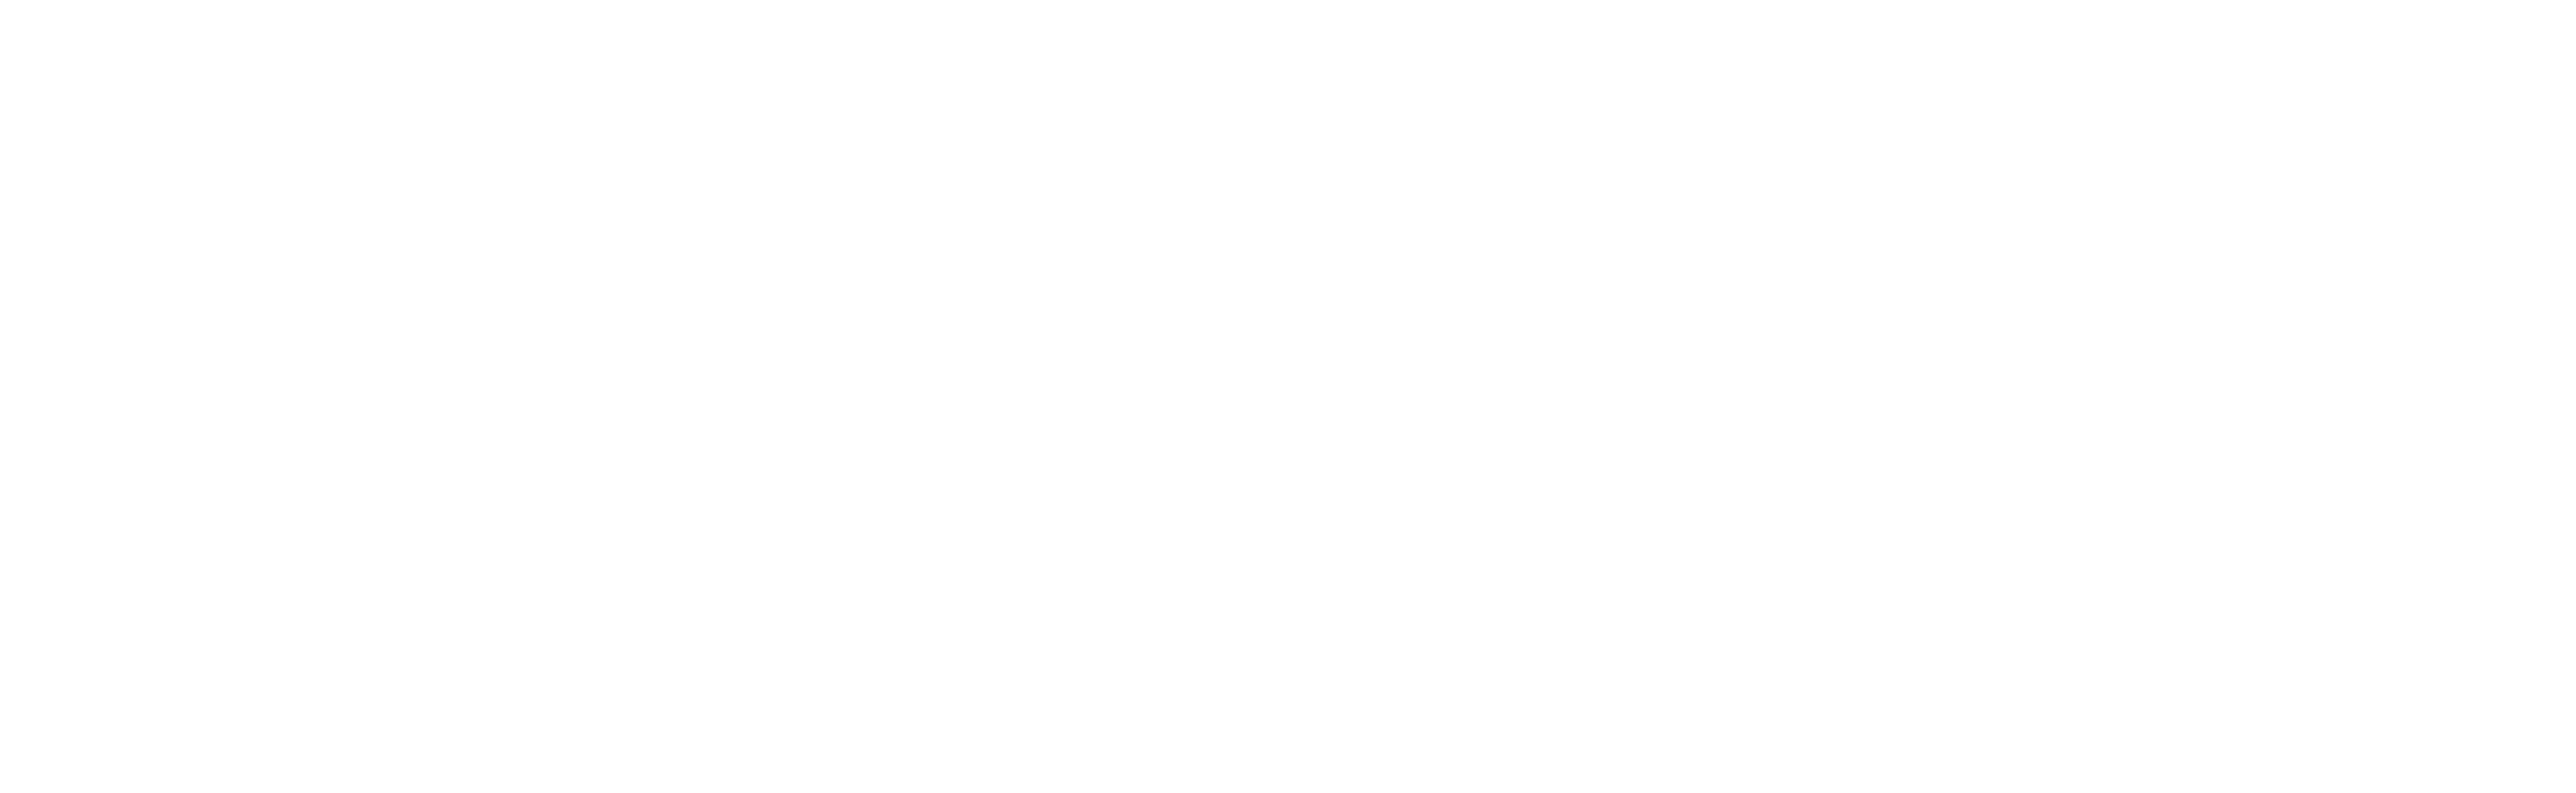 Acted